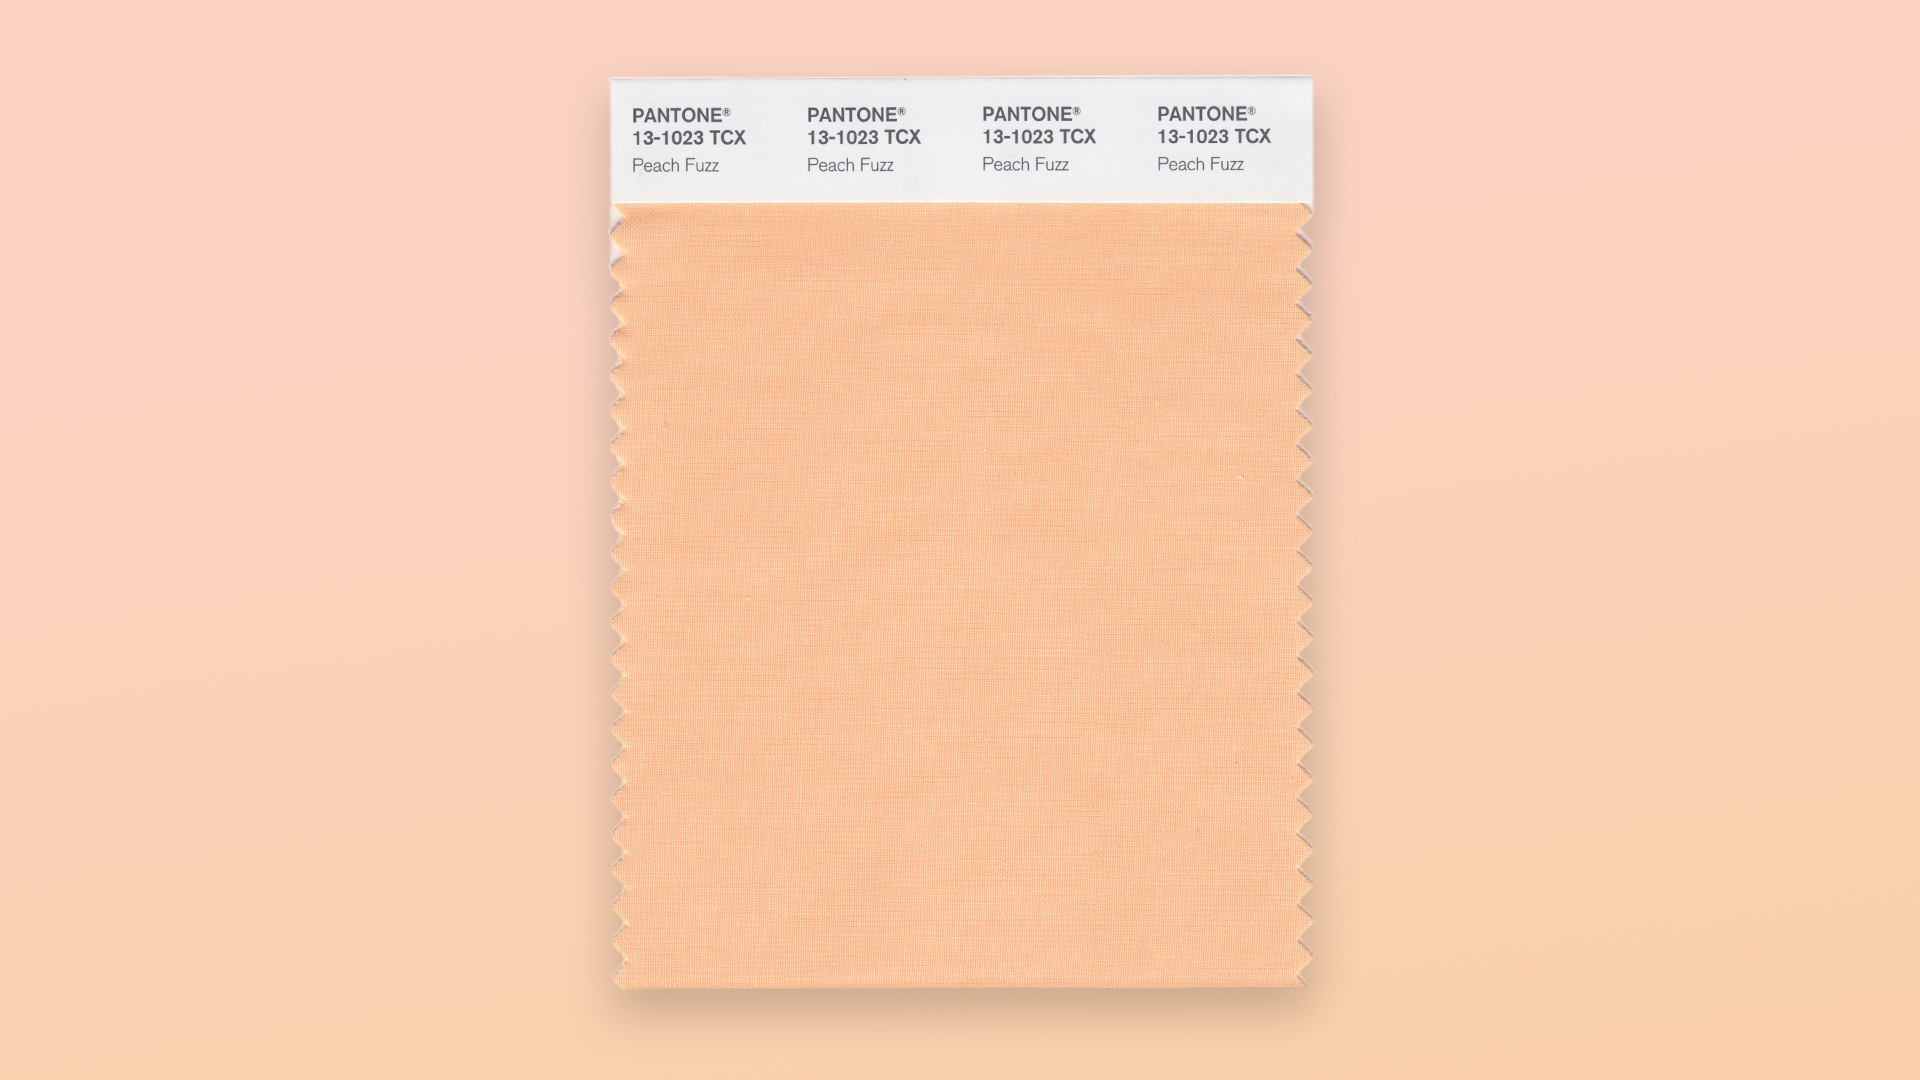 Do We Still Collectively Care About the Pantone COY? Color Experts Weigh In